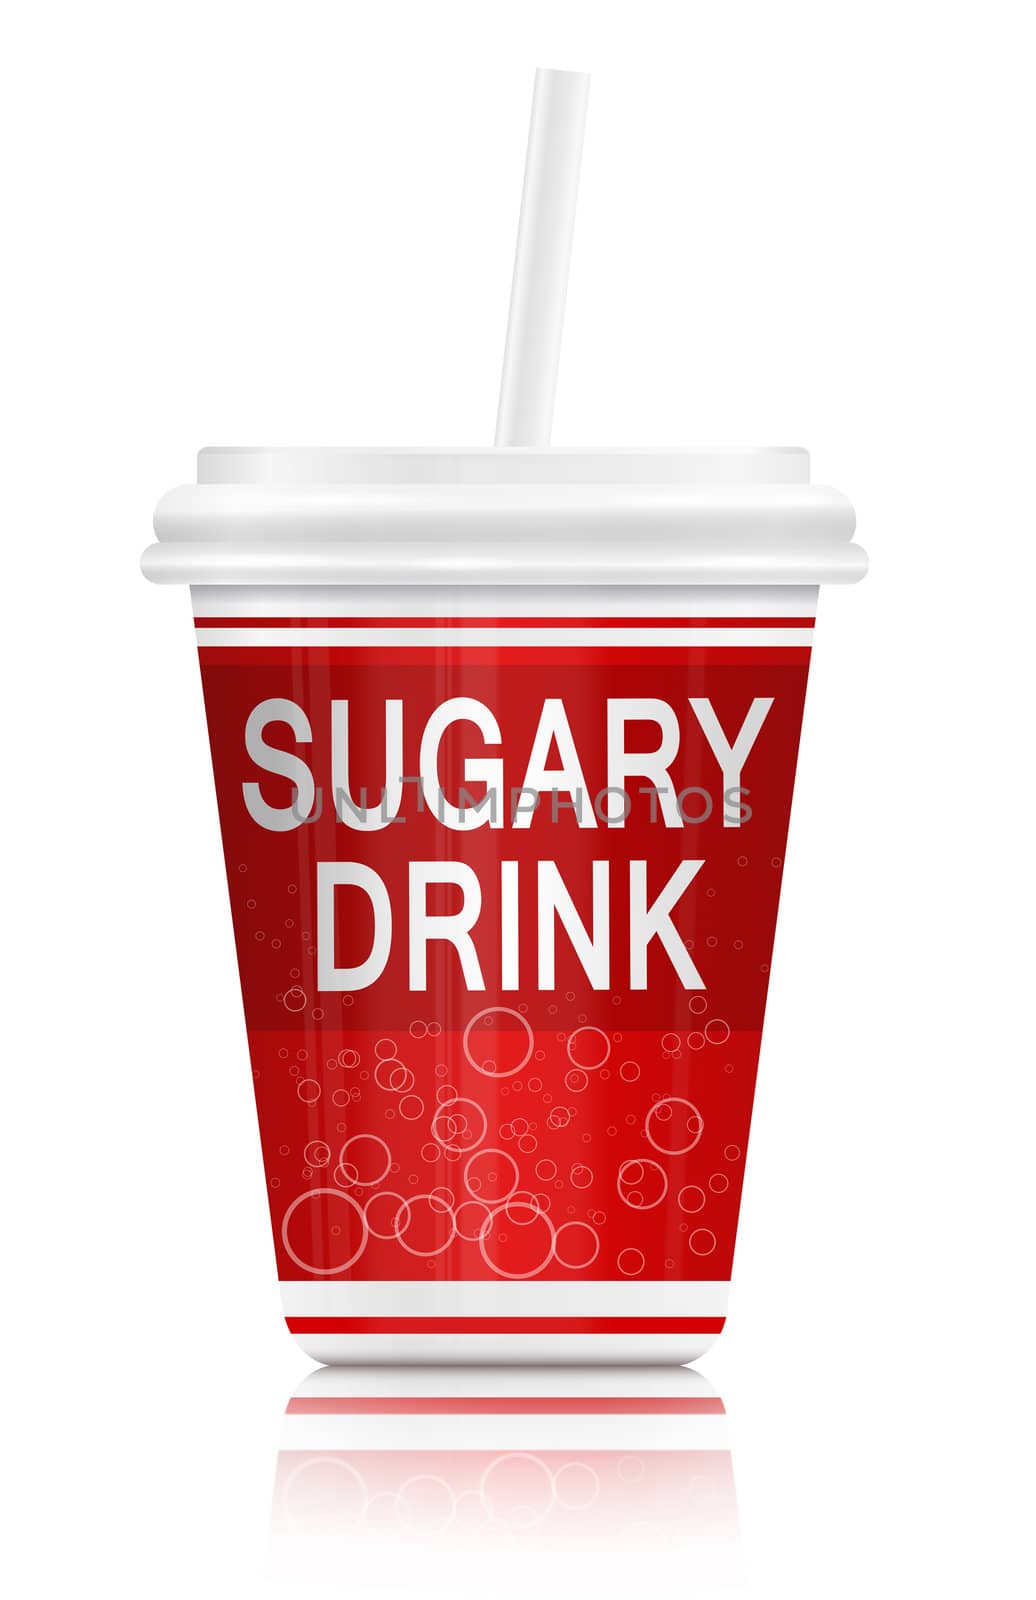 Illustration depicting a single red fast food drink containers with a sugar concept. Arranged over white.